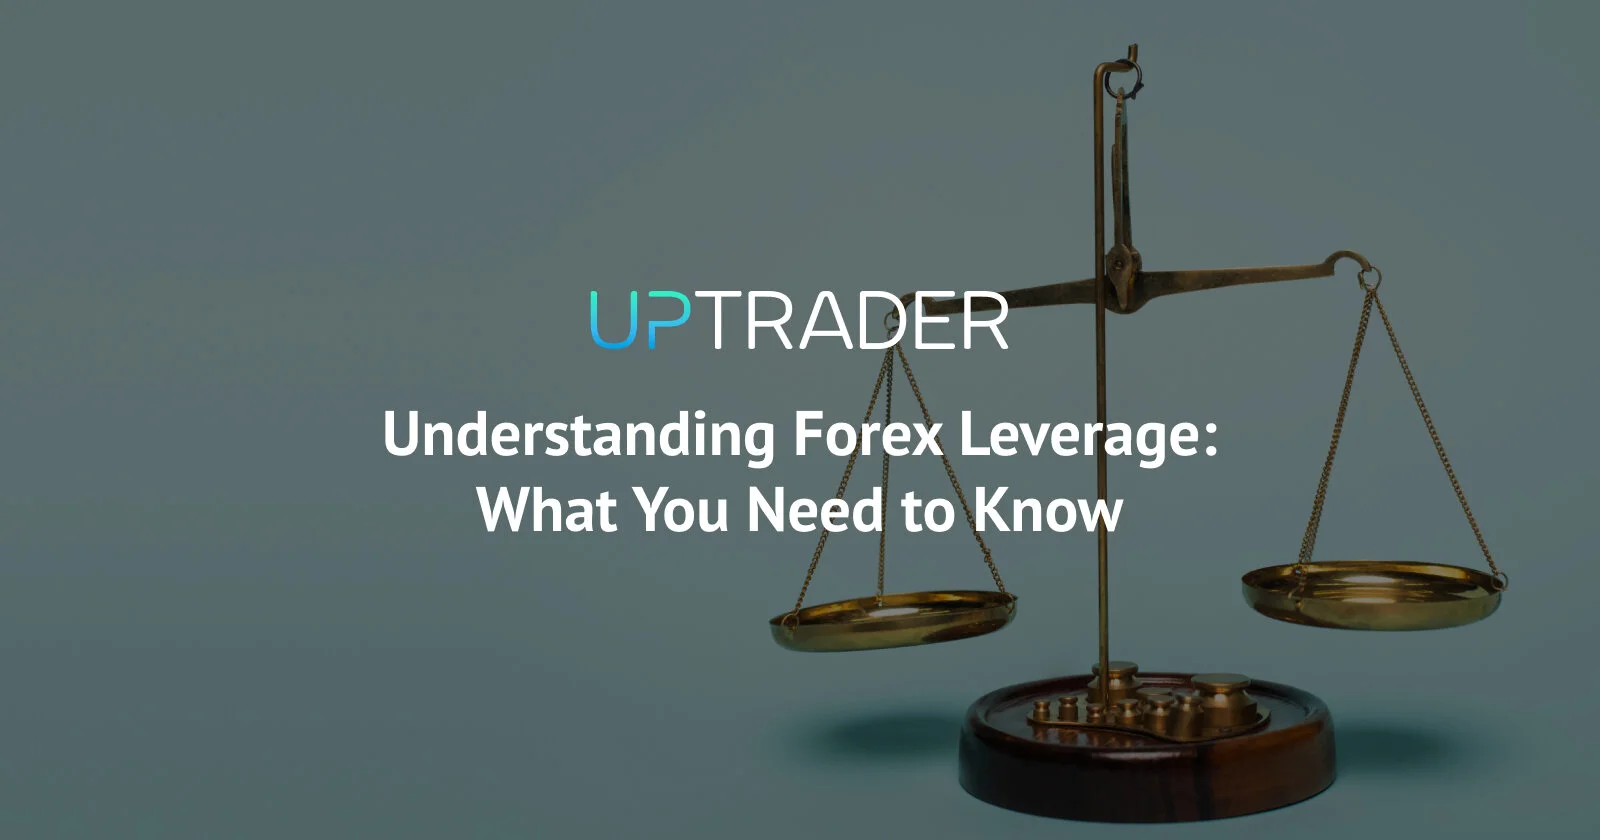 Understanding Forex Leverage: What You Need to Know